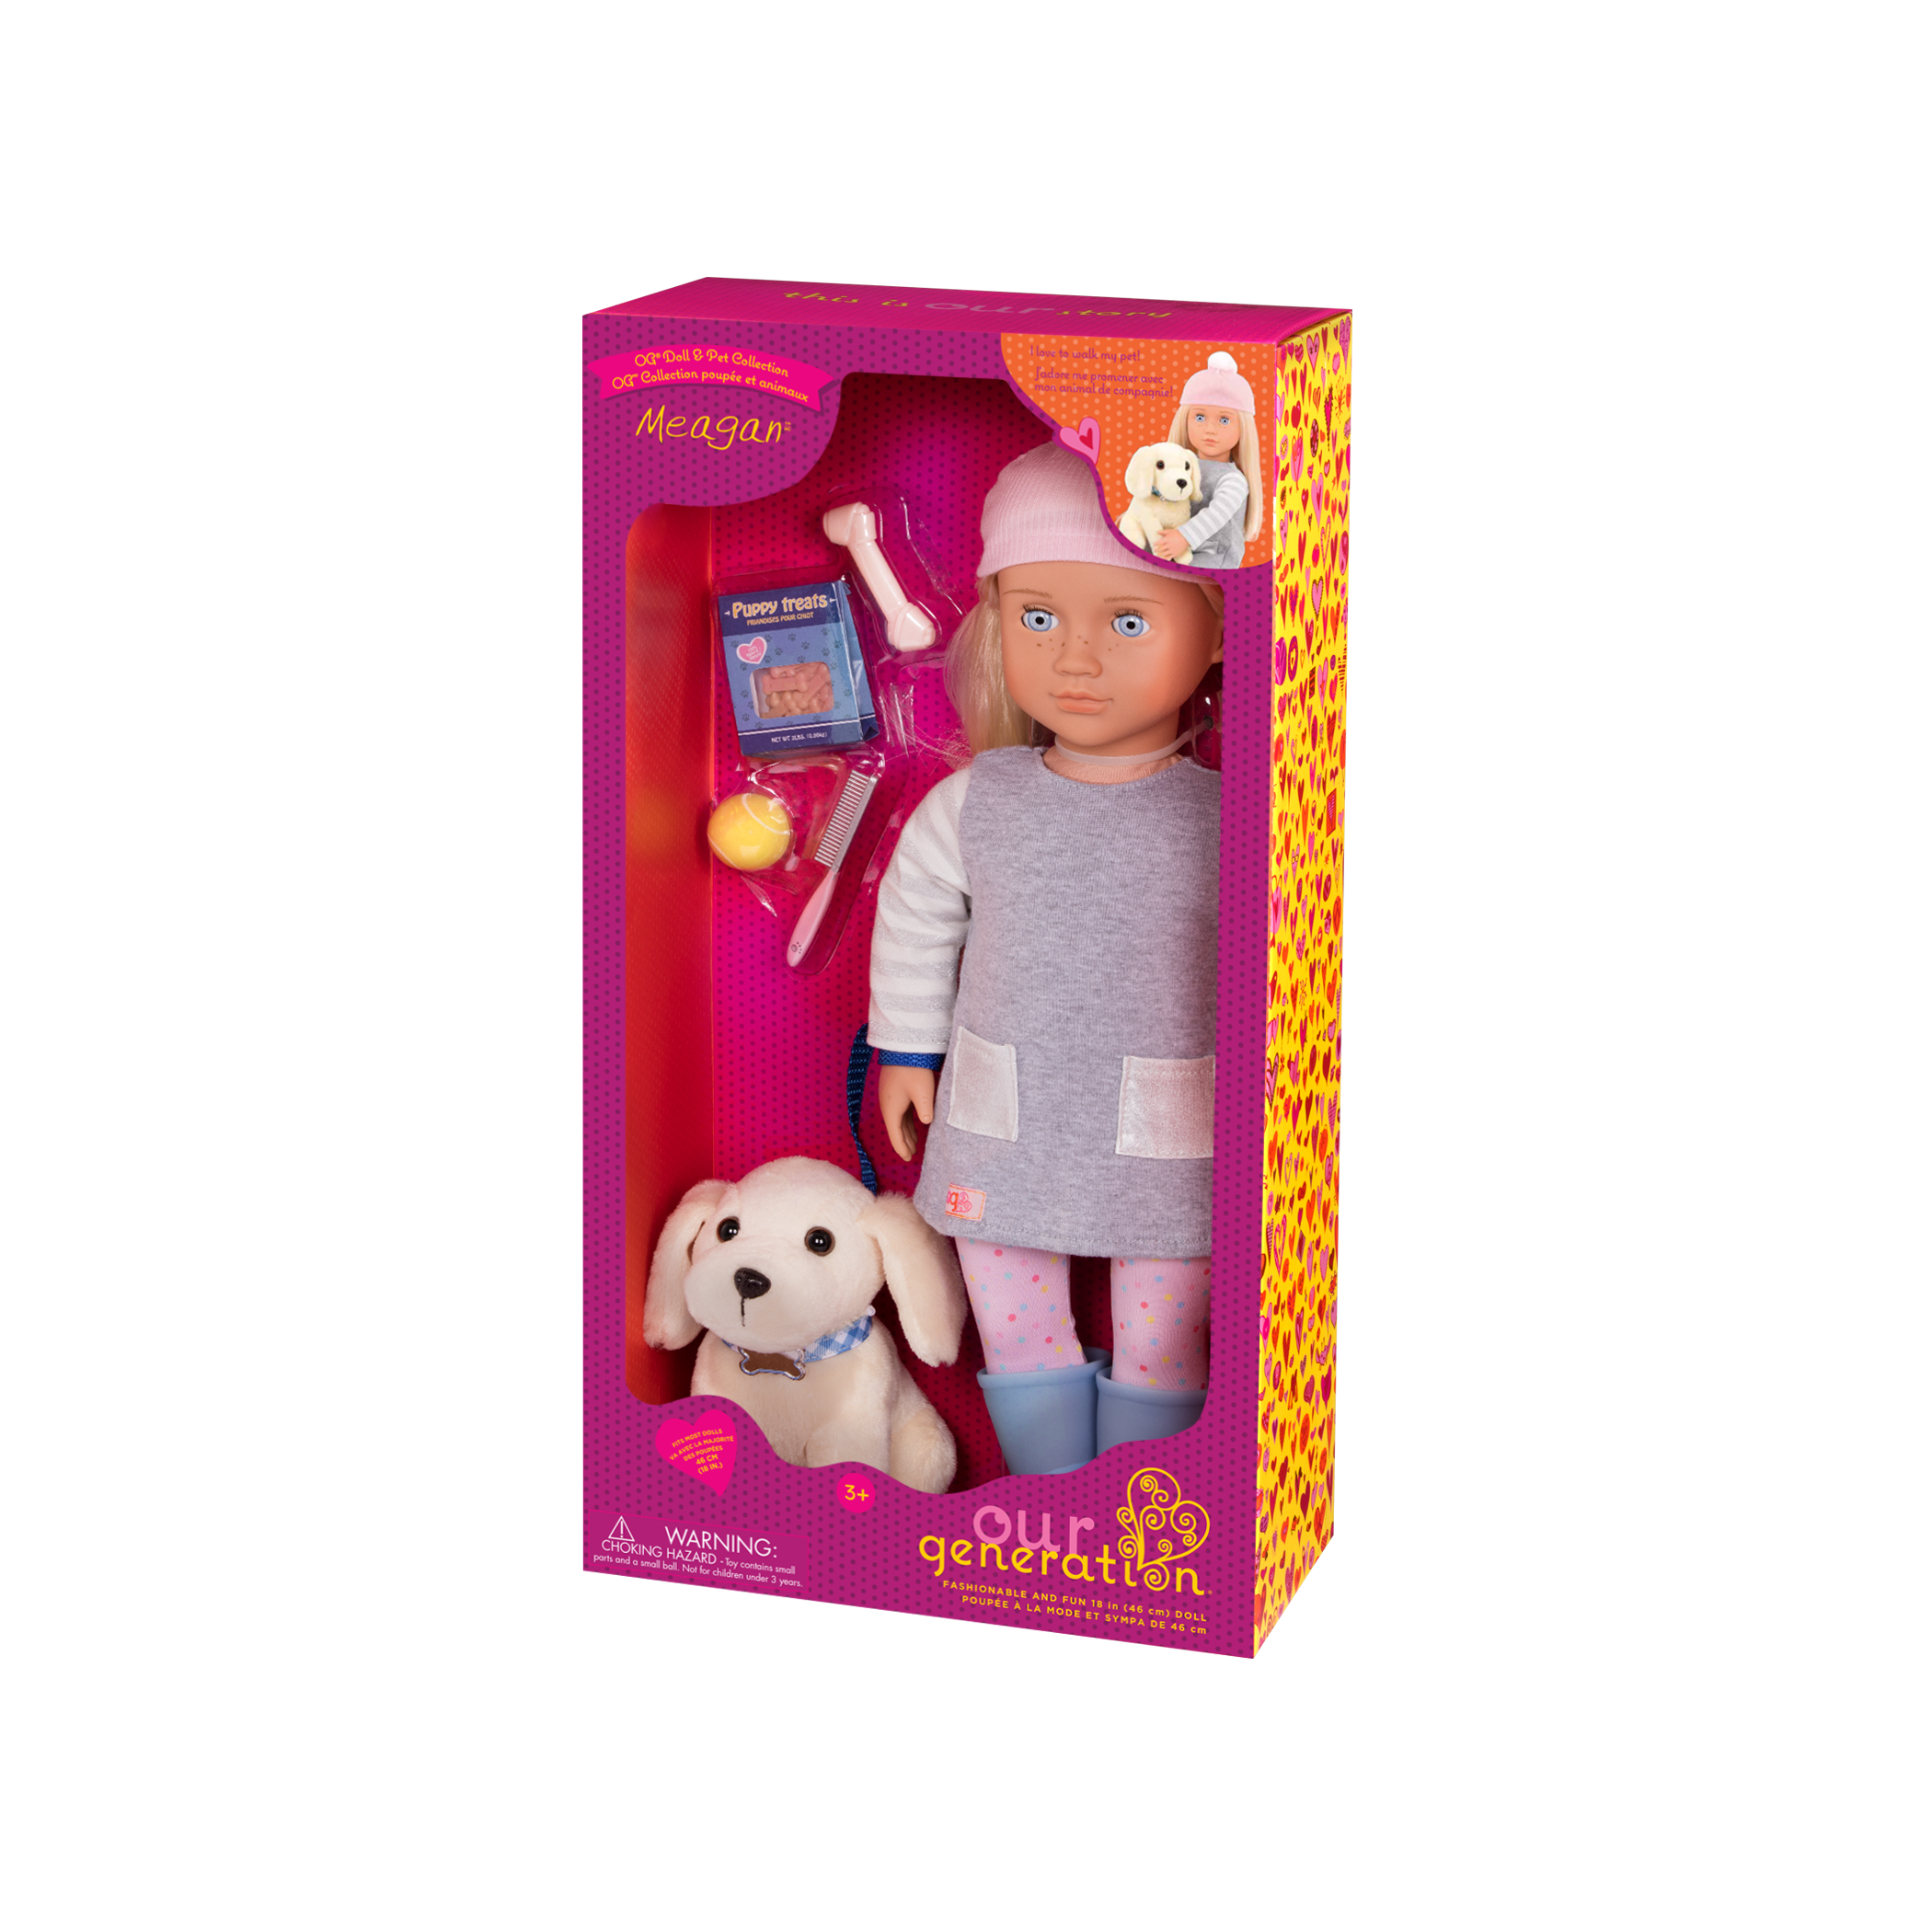 Meagan and Golden Retriever 18-inch doll and pet in packaging